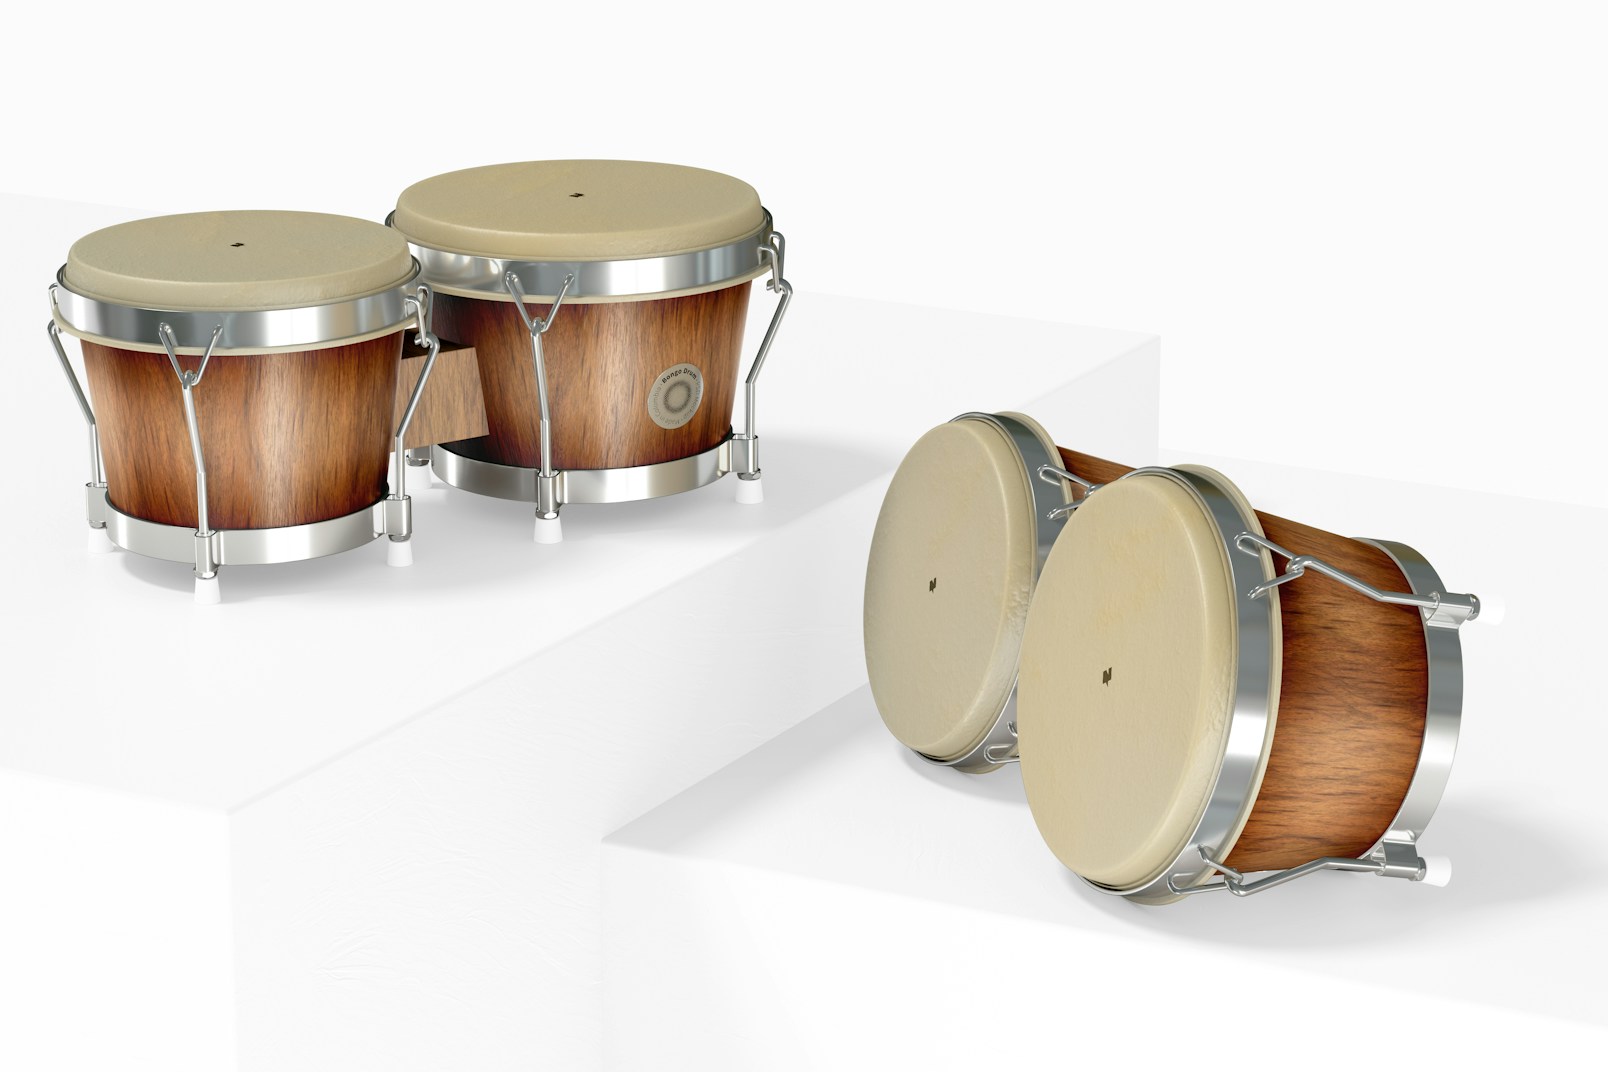 Bongo Drums Mockup, Standing and Dropped